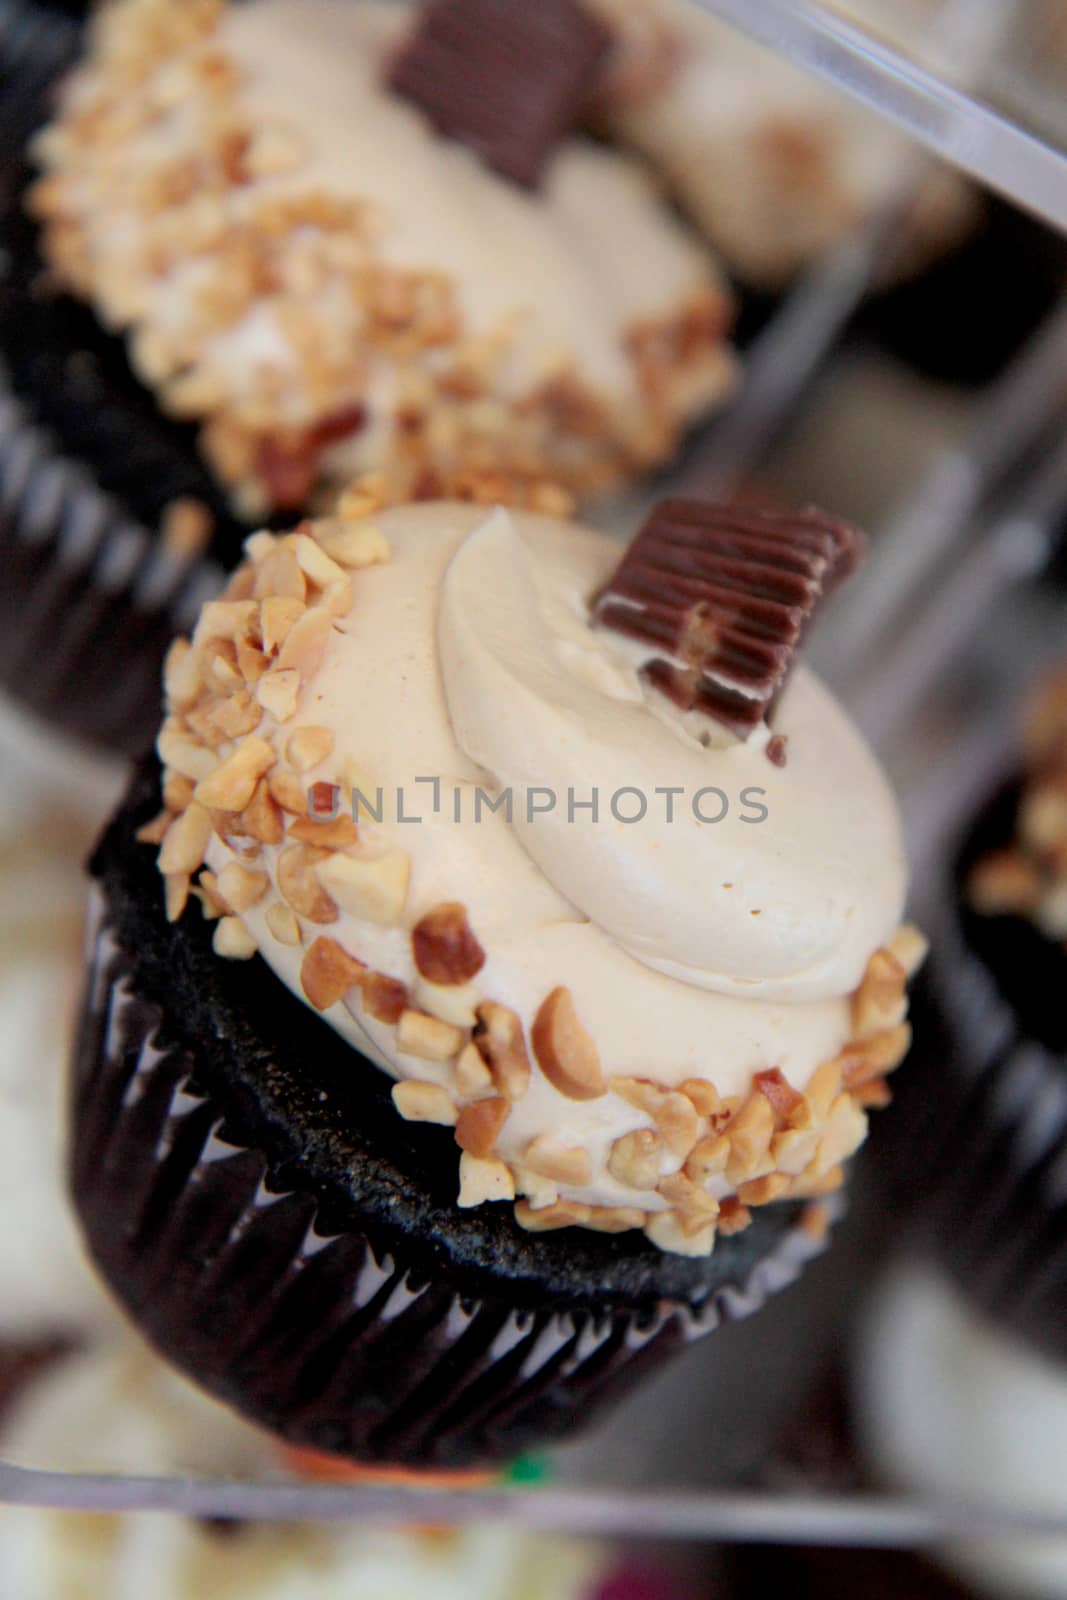 chocolate and peanut butter cupcake at bakery